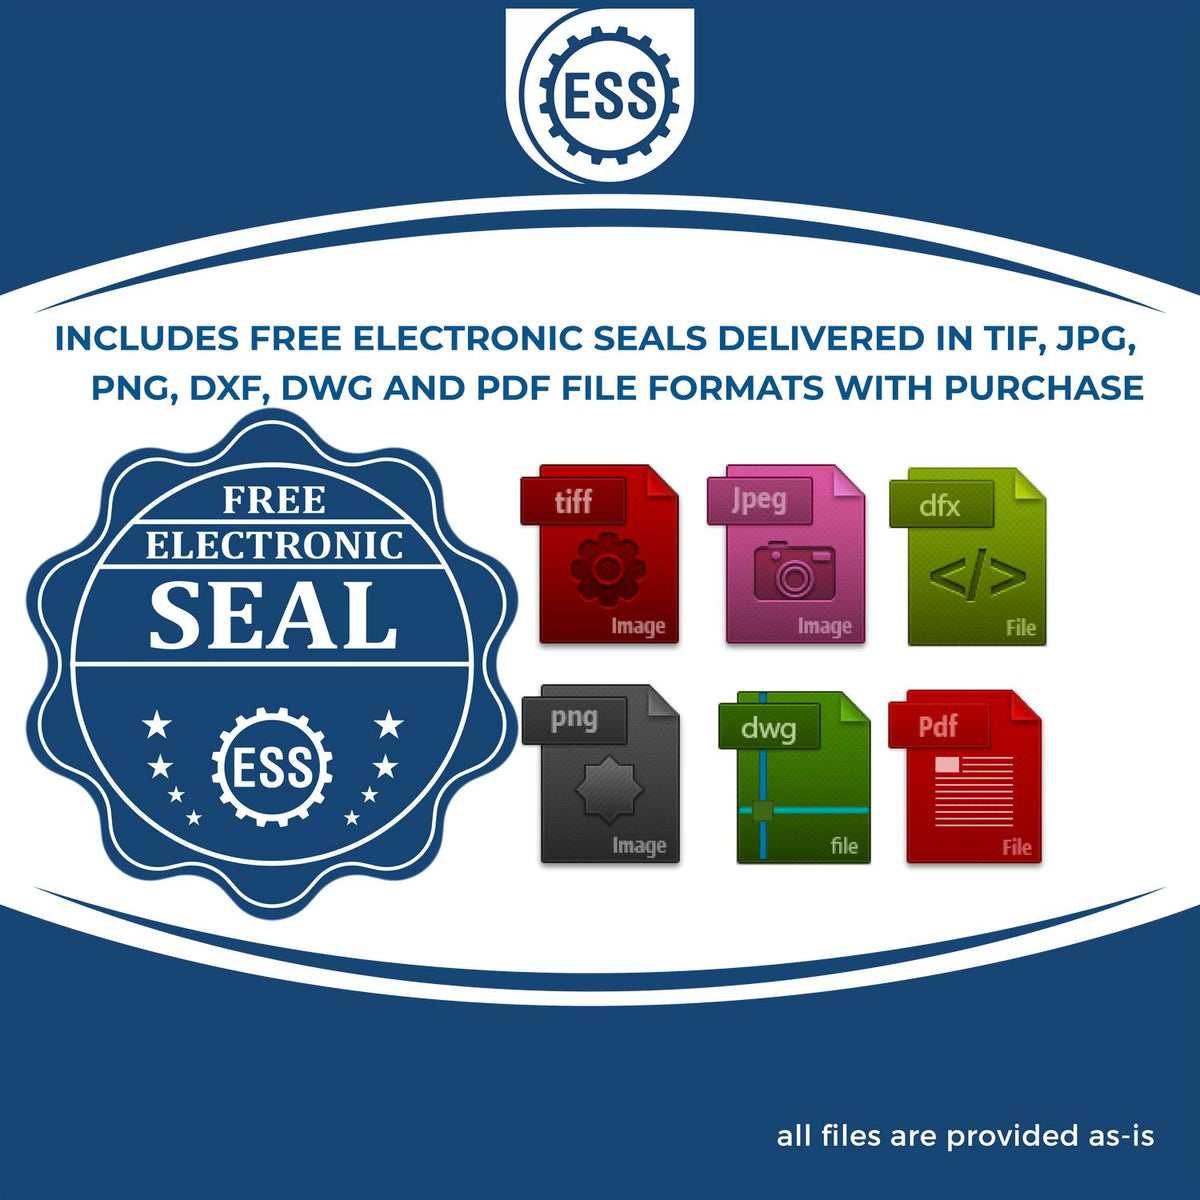 An infographic for the free electronic seal for the Self-Inking Wyoming PE Stamp illustrating the different file type icons such as DXF, DWG, TIF, JPG and PNG.